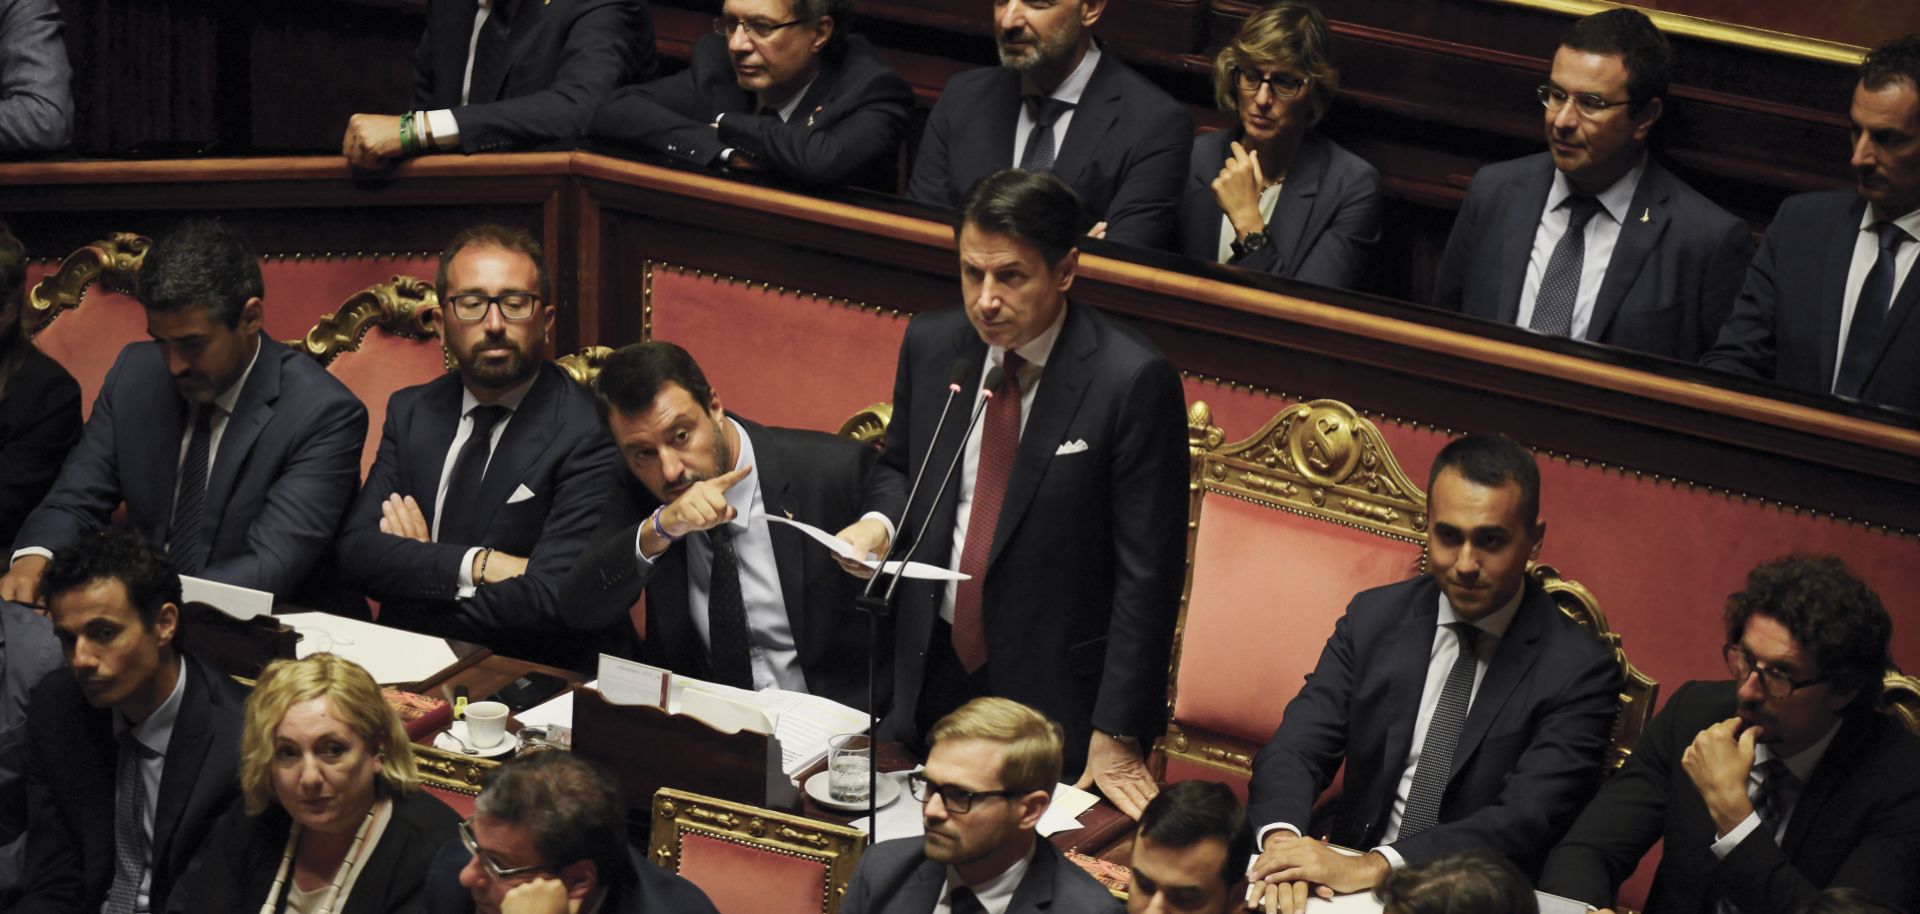 Italian Prime Minister Giuseppe Conte announces his resignation in the country's Senate on Aug. 20, 2019, as Deputy Prime Minister Matteo Salvini gestures beside him.